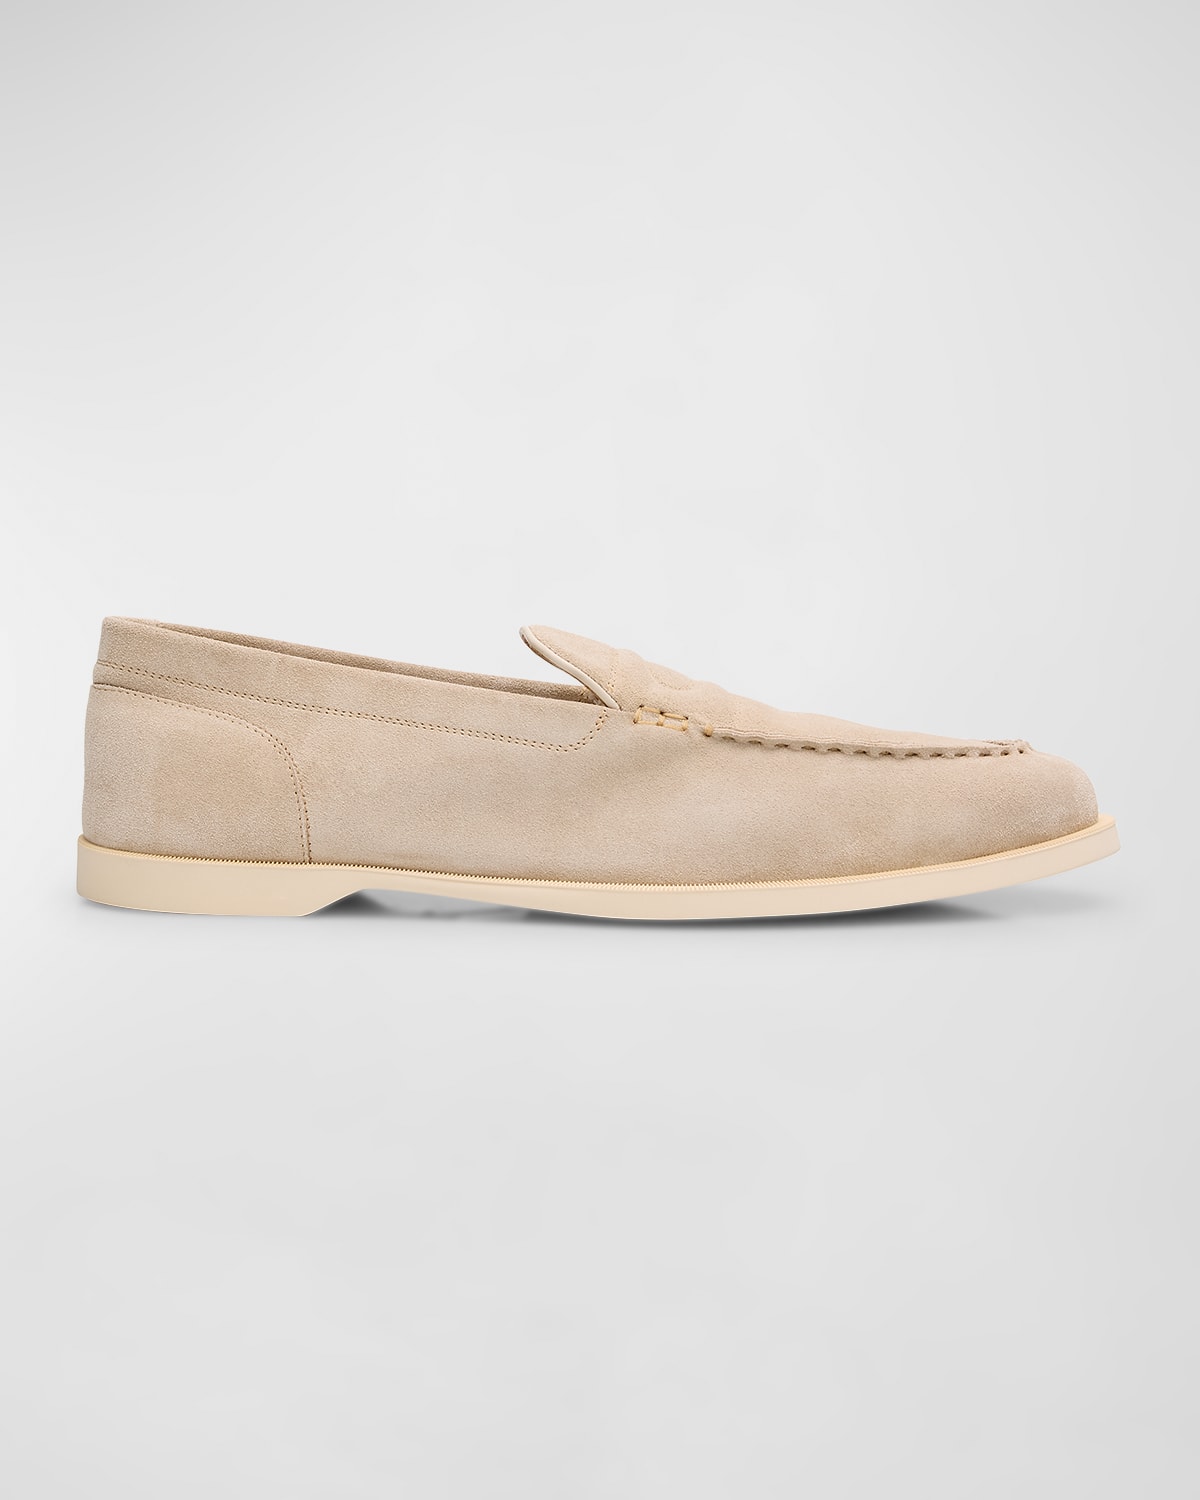 Men's Pace Suede Penny Loafers